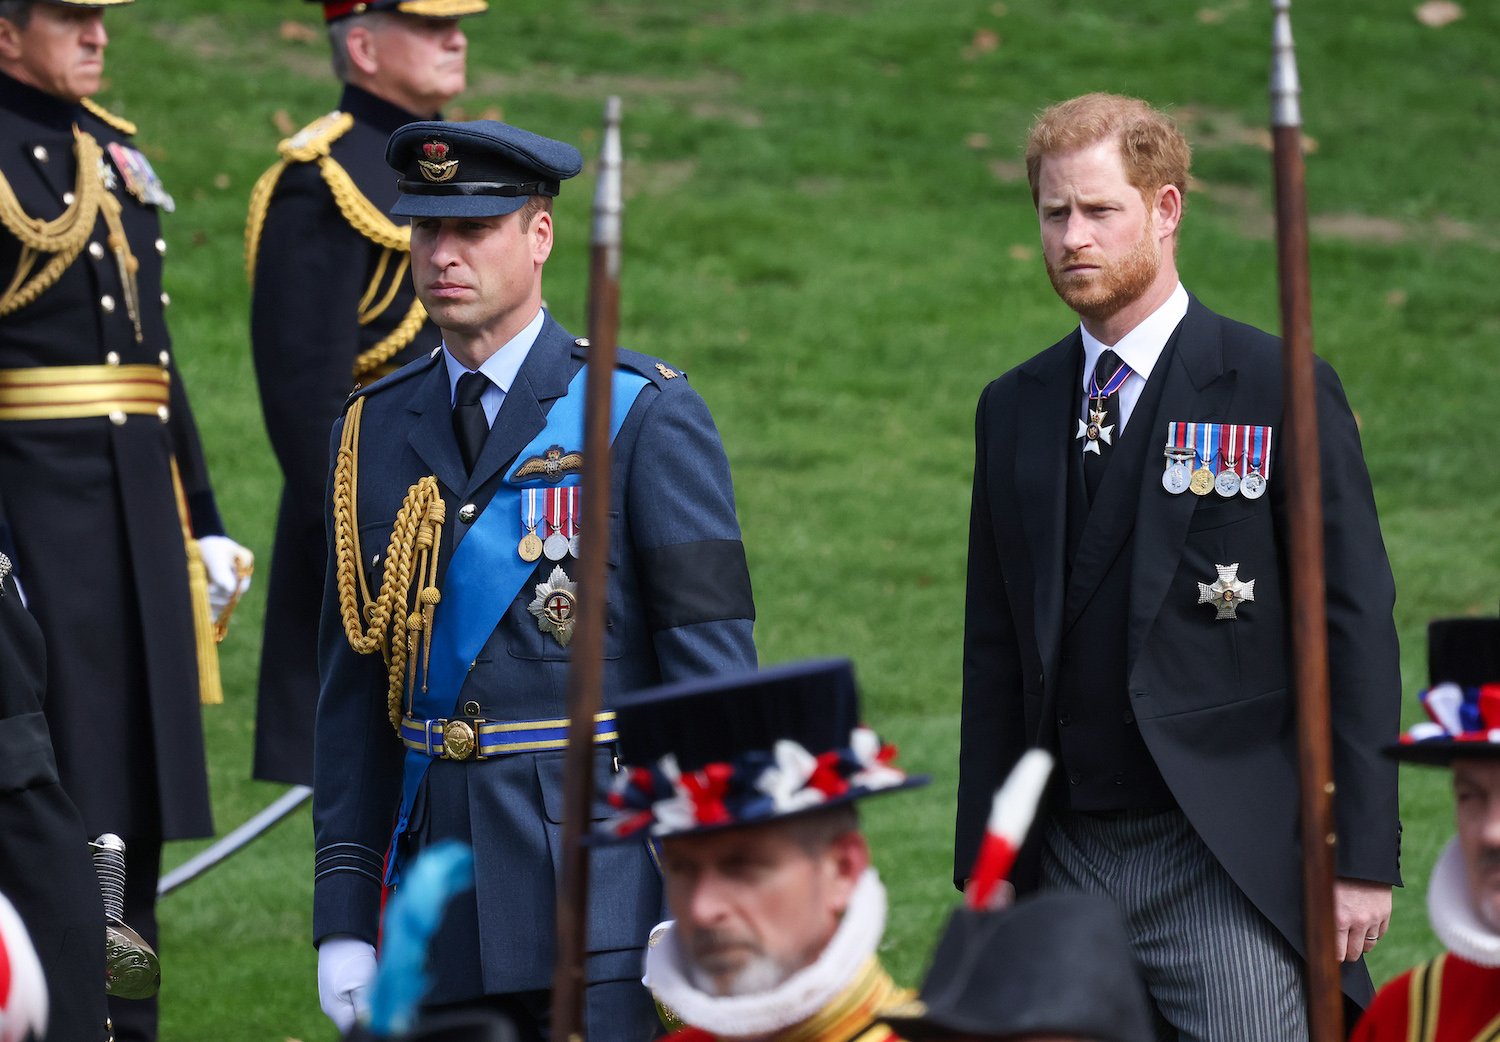 Prince William and Prince Harry attend Queen Elizabeth's funeral together